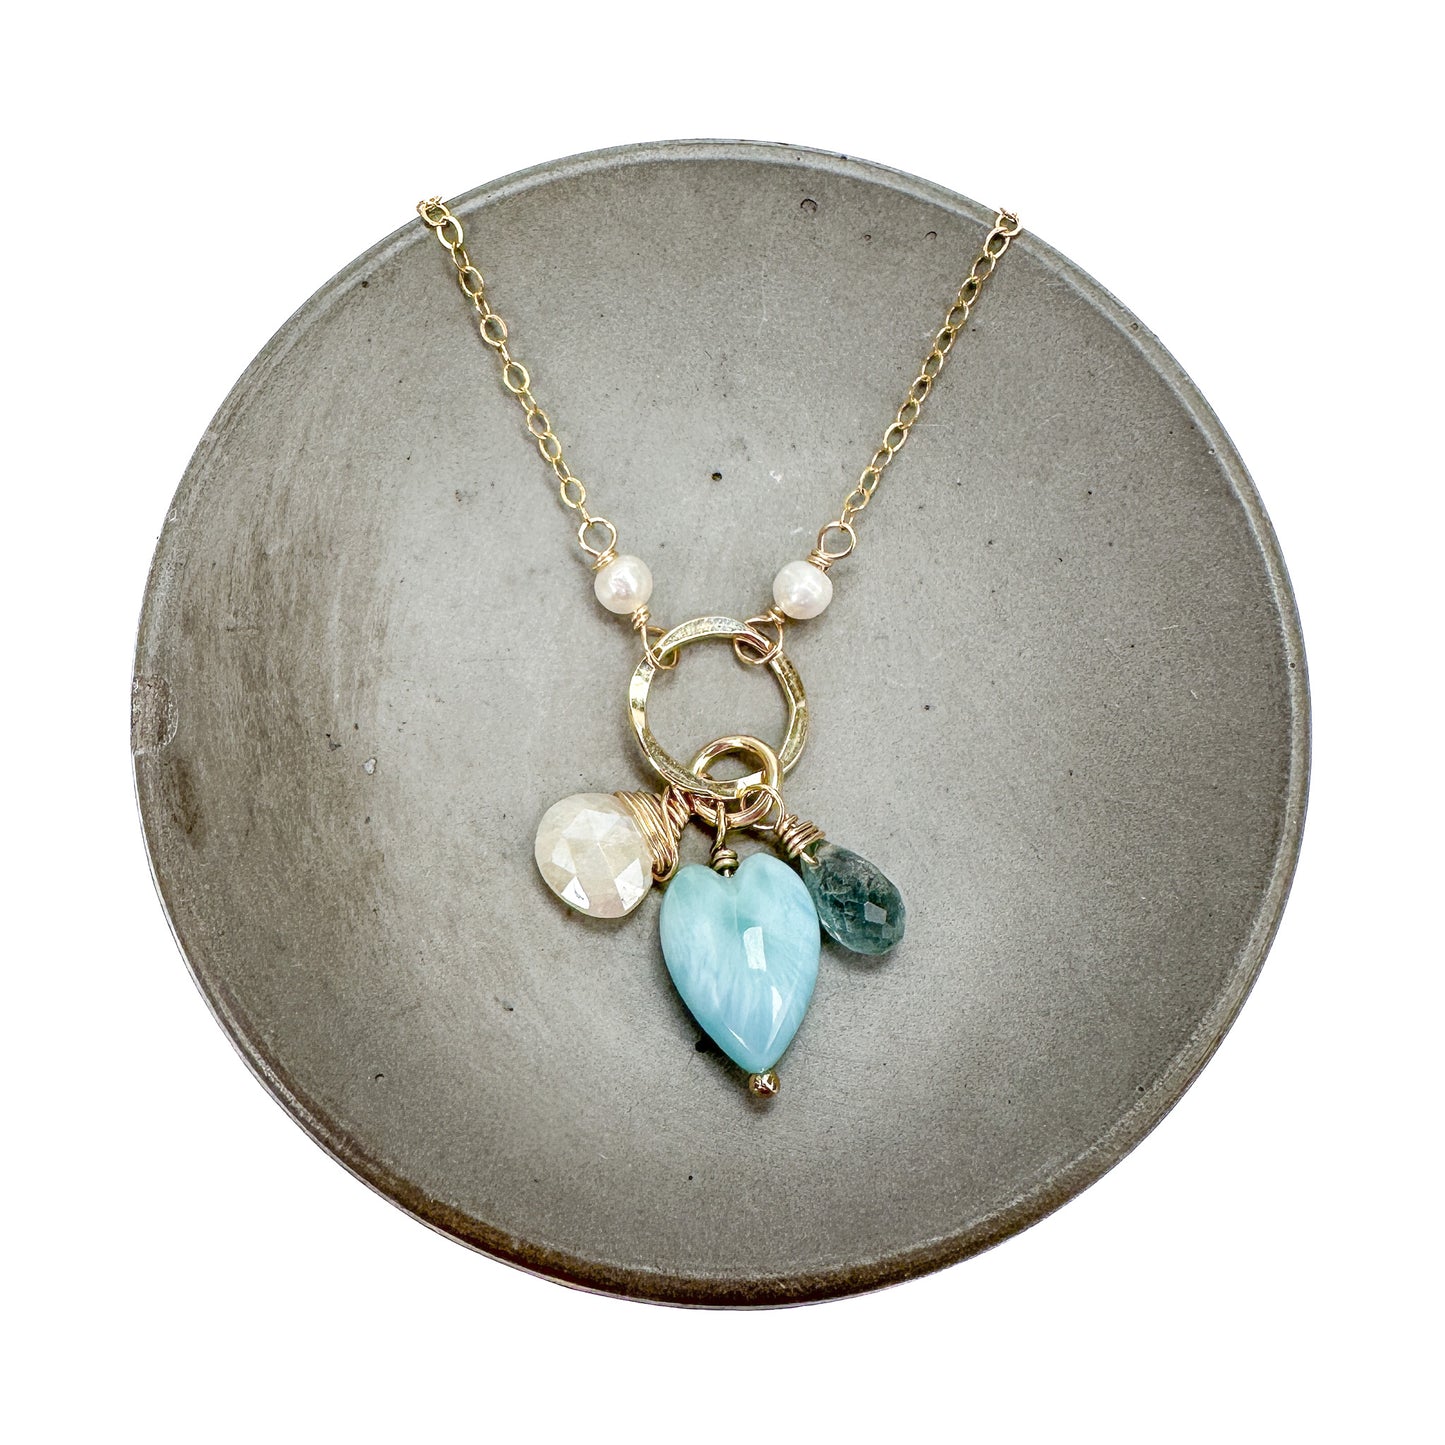 Larimar Heart Charm Pendant or Necklace - Gold Filled-The Bead Gallery Honolulu